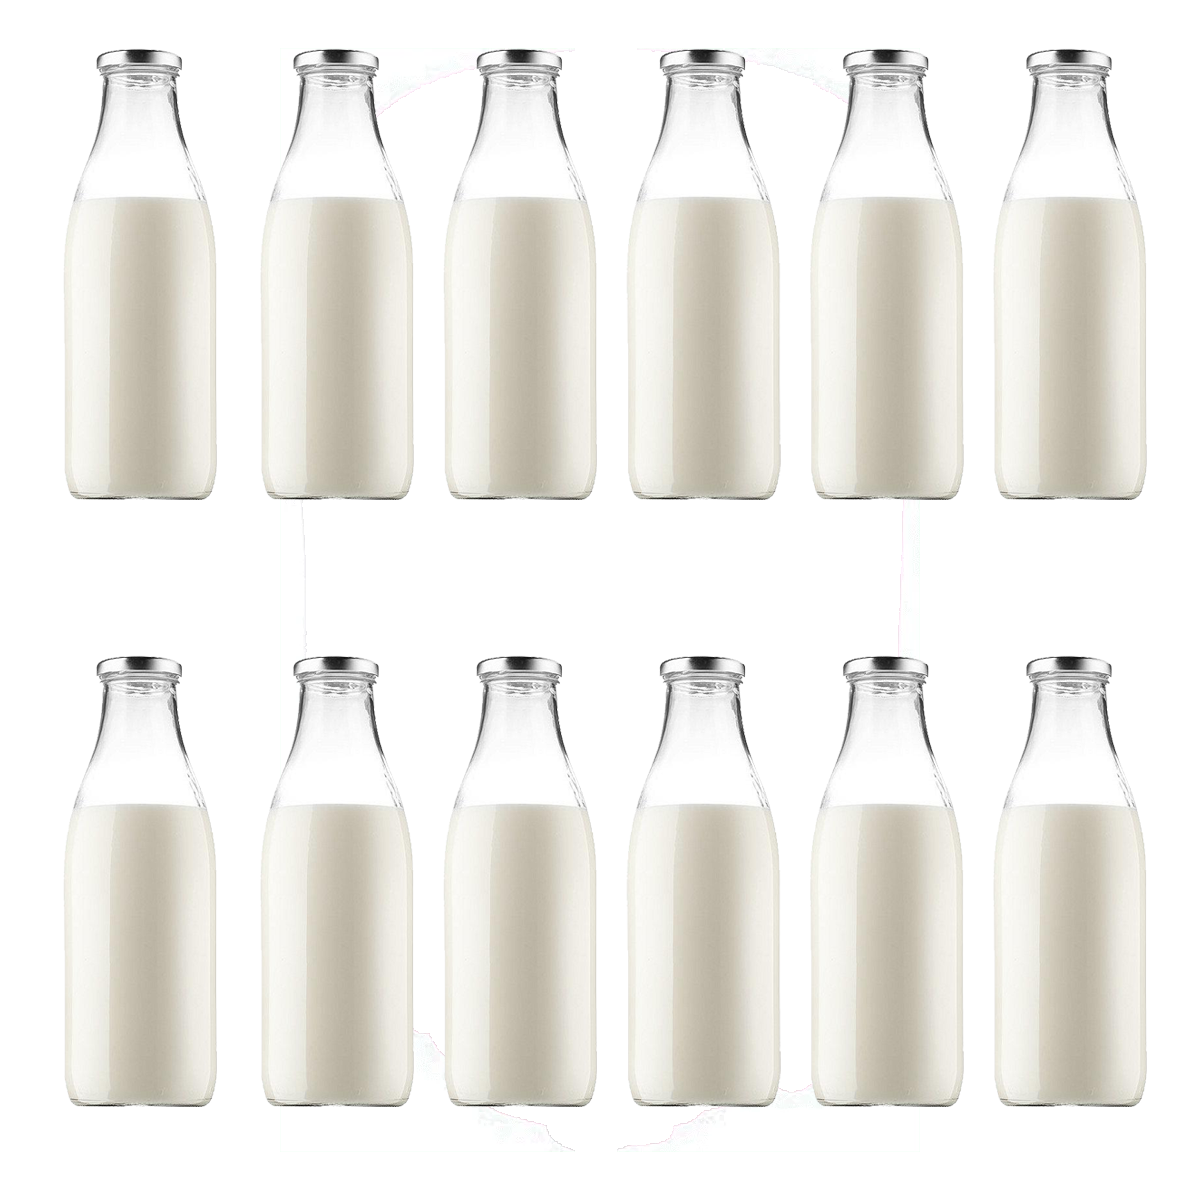 Milk, Juice Glass Bottle with White/Black/Yellow/Red Cap 500ml - 12 Pc Pack